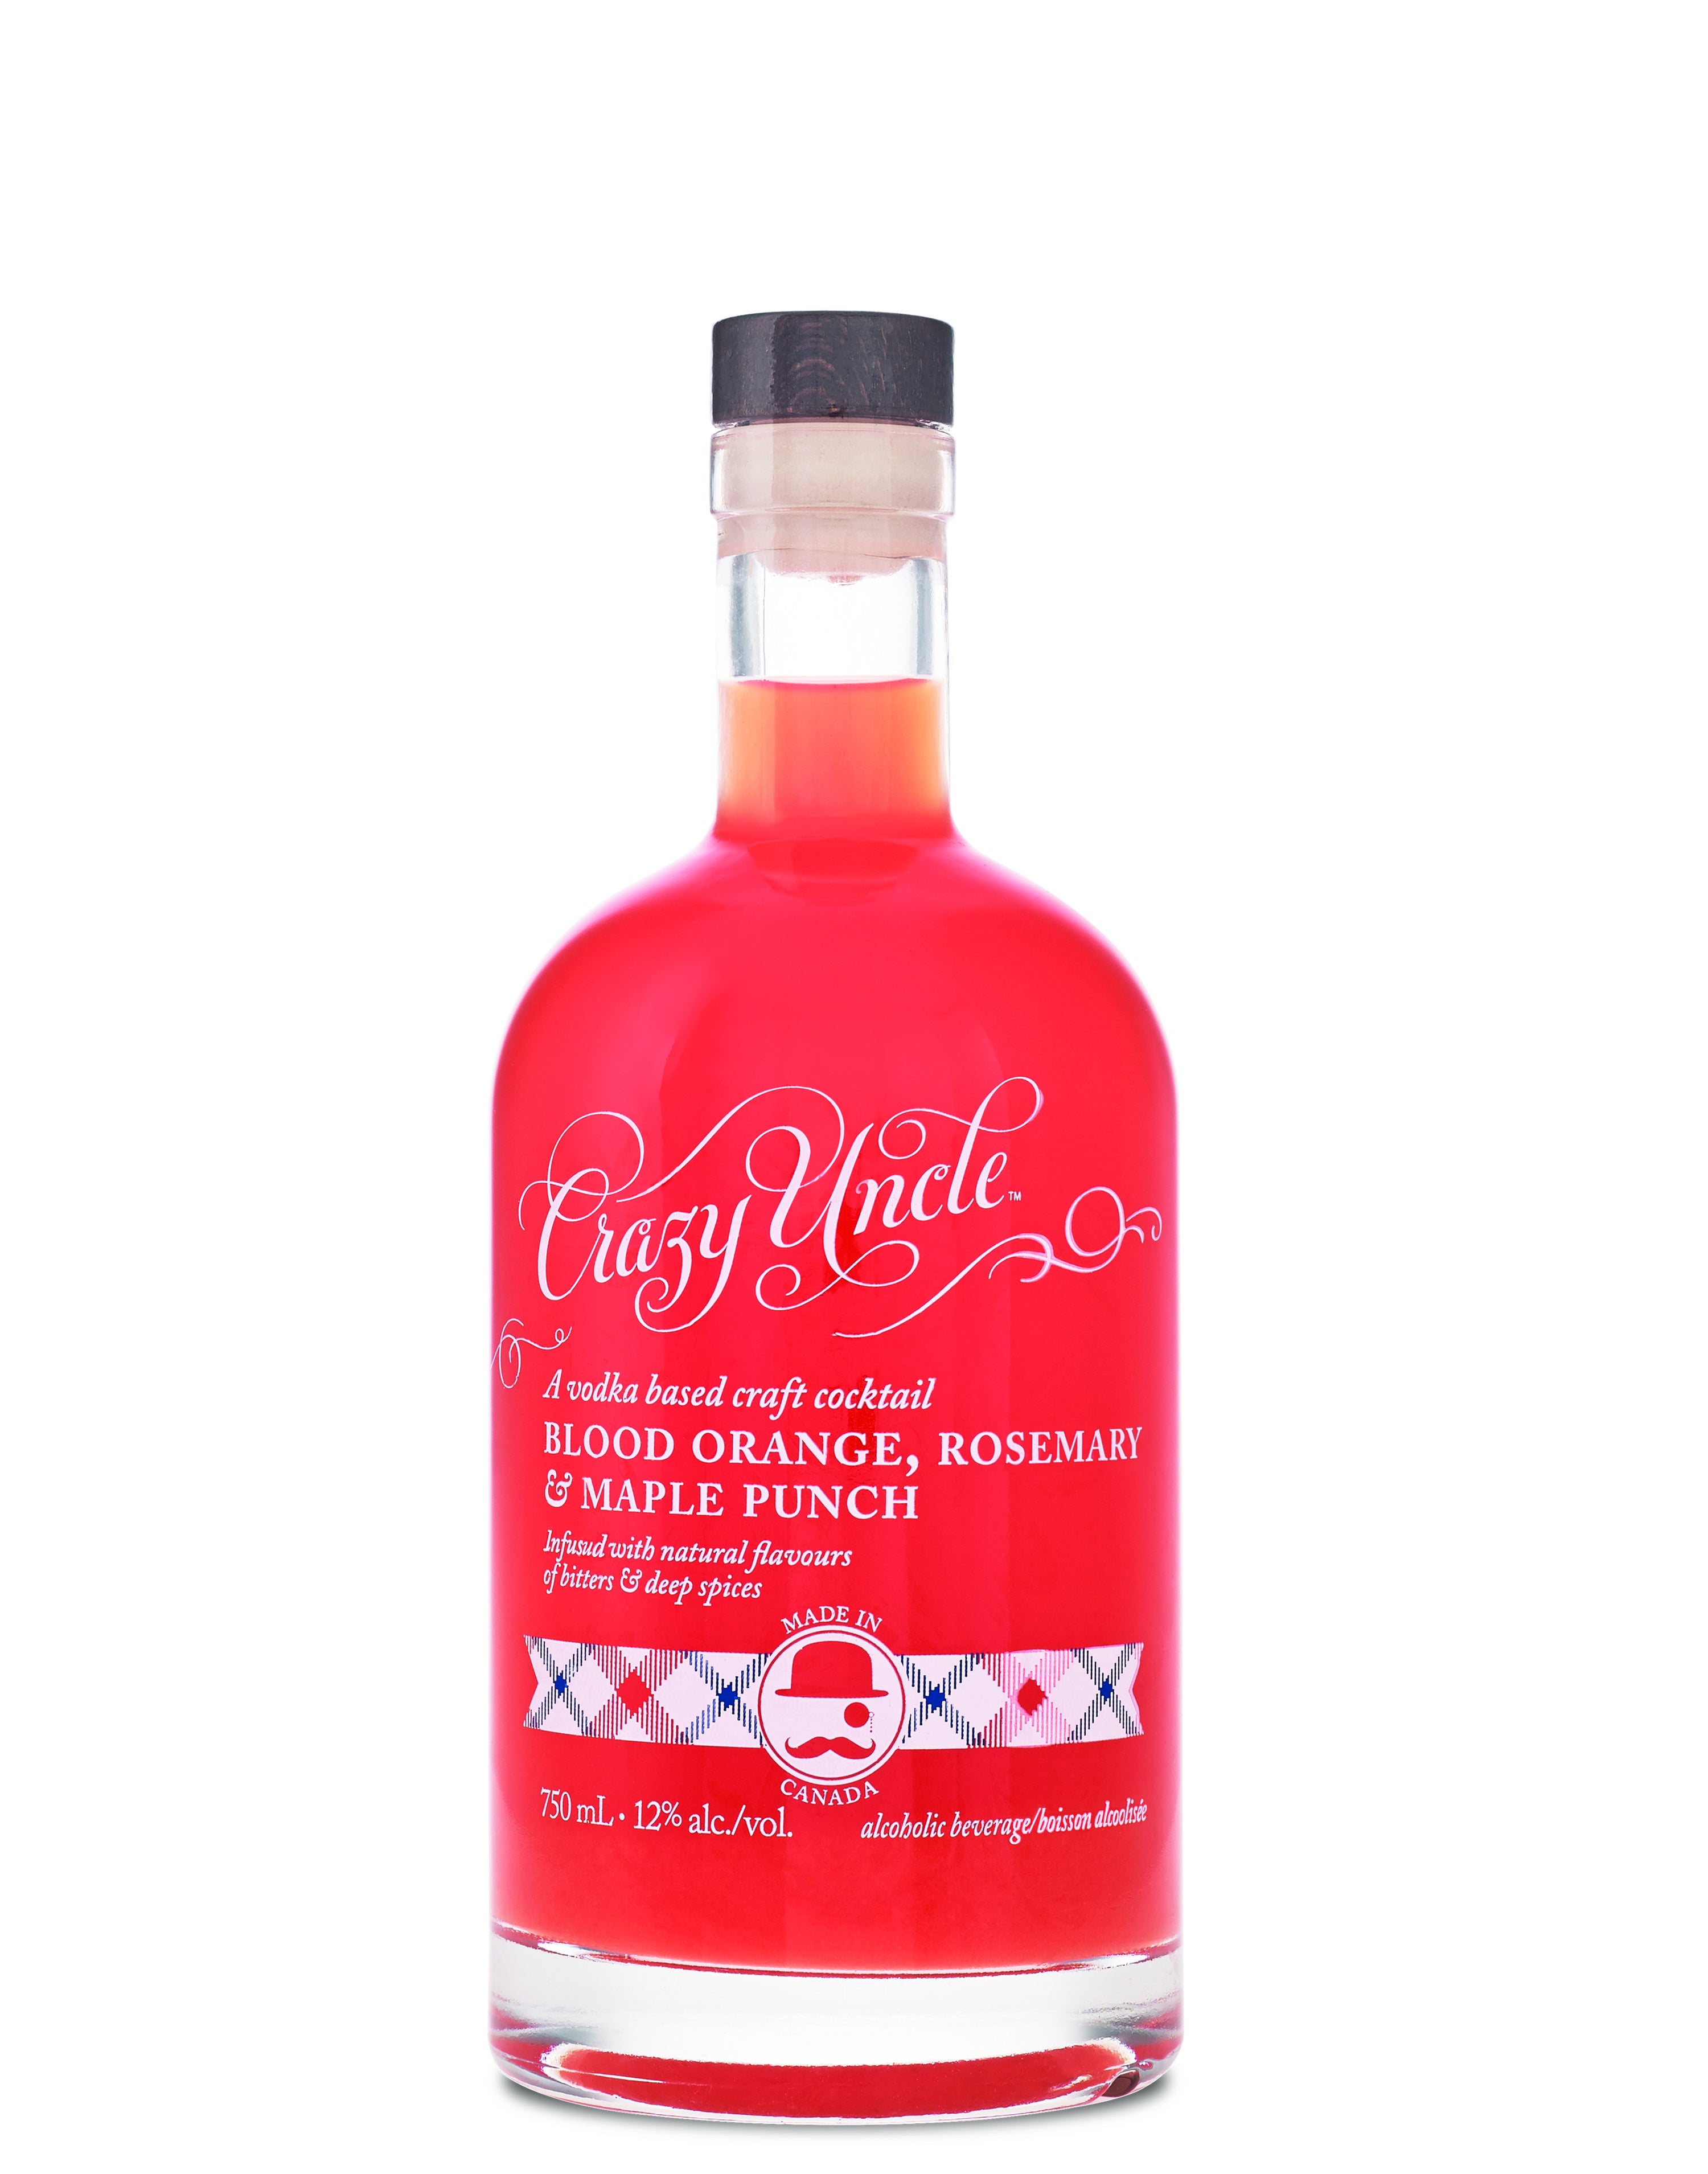 A bottle of premixed punch on a plain background